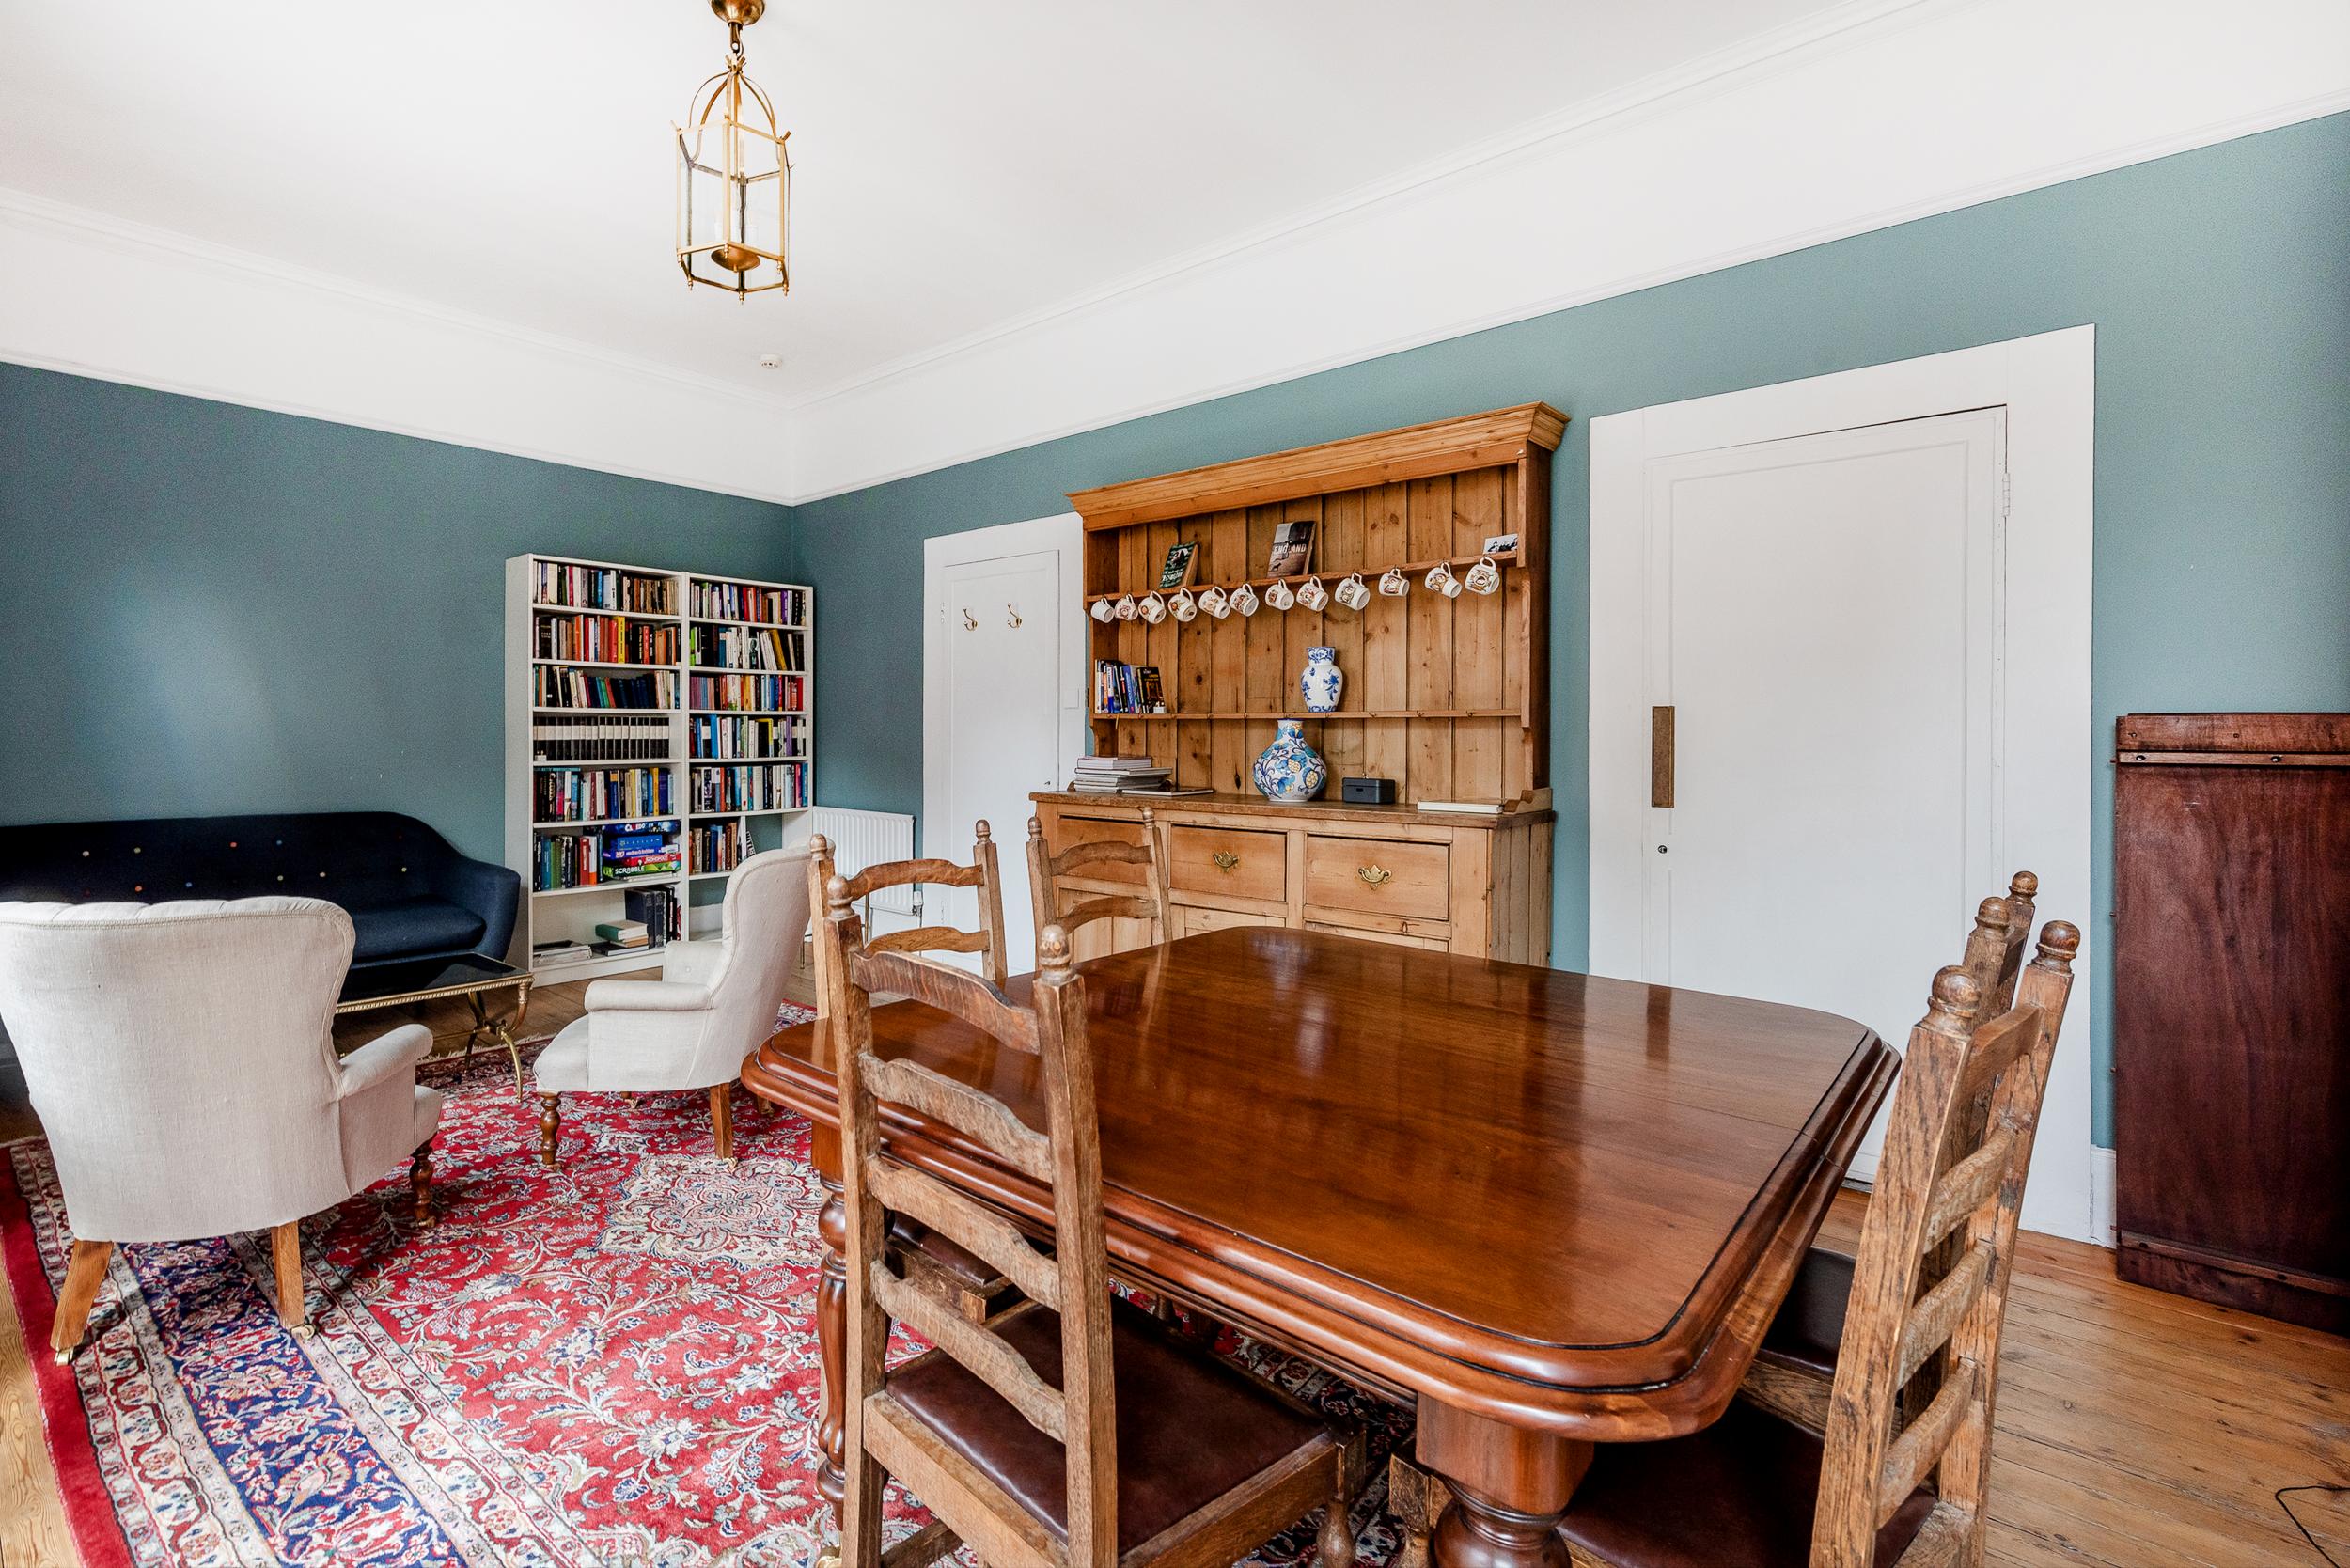 Guests at this 19th-century property have access to four bedrooms and two bathrooms